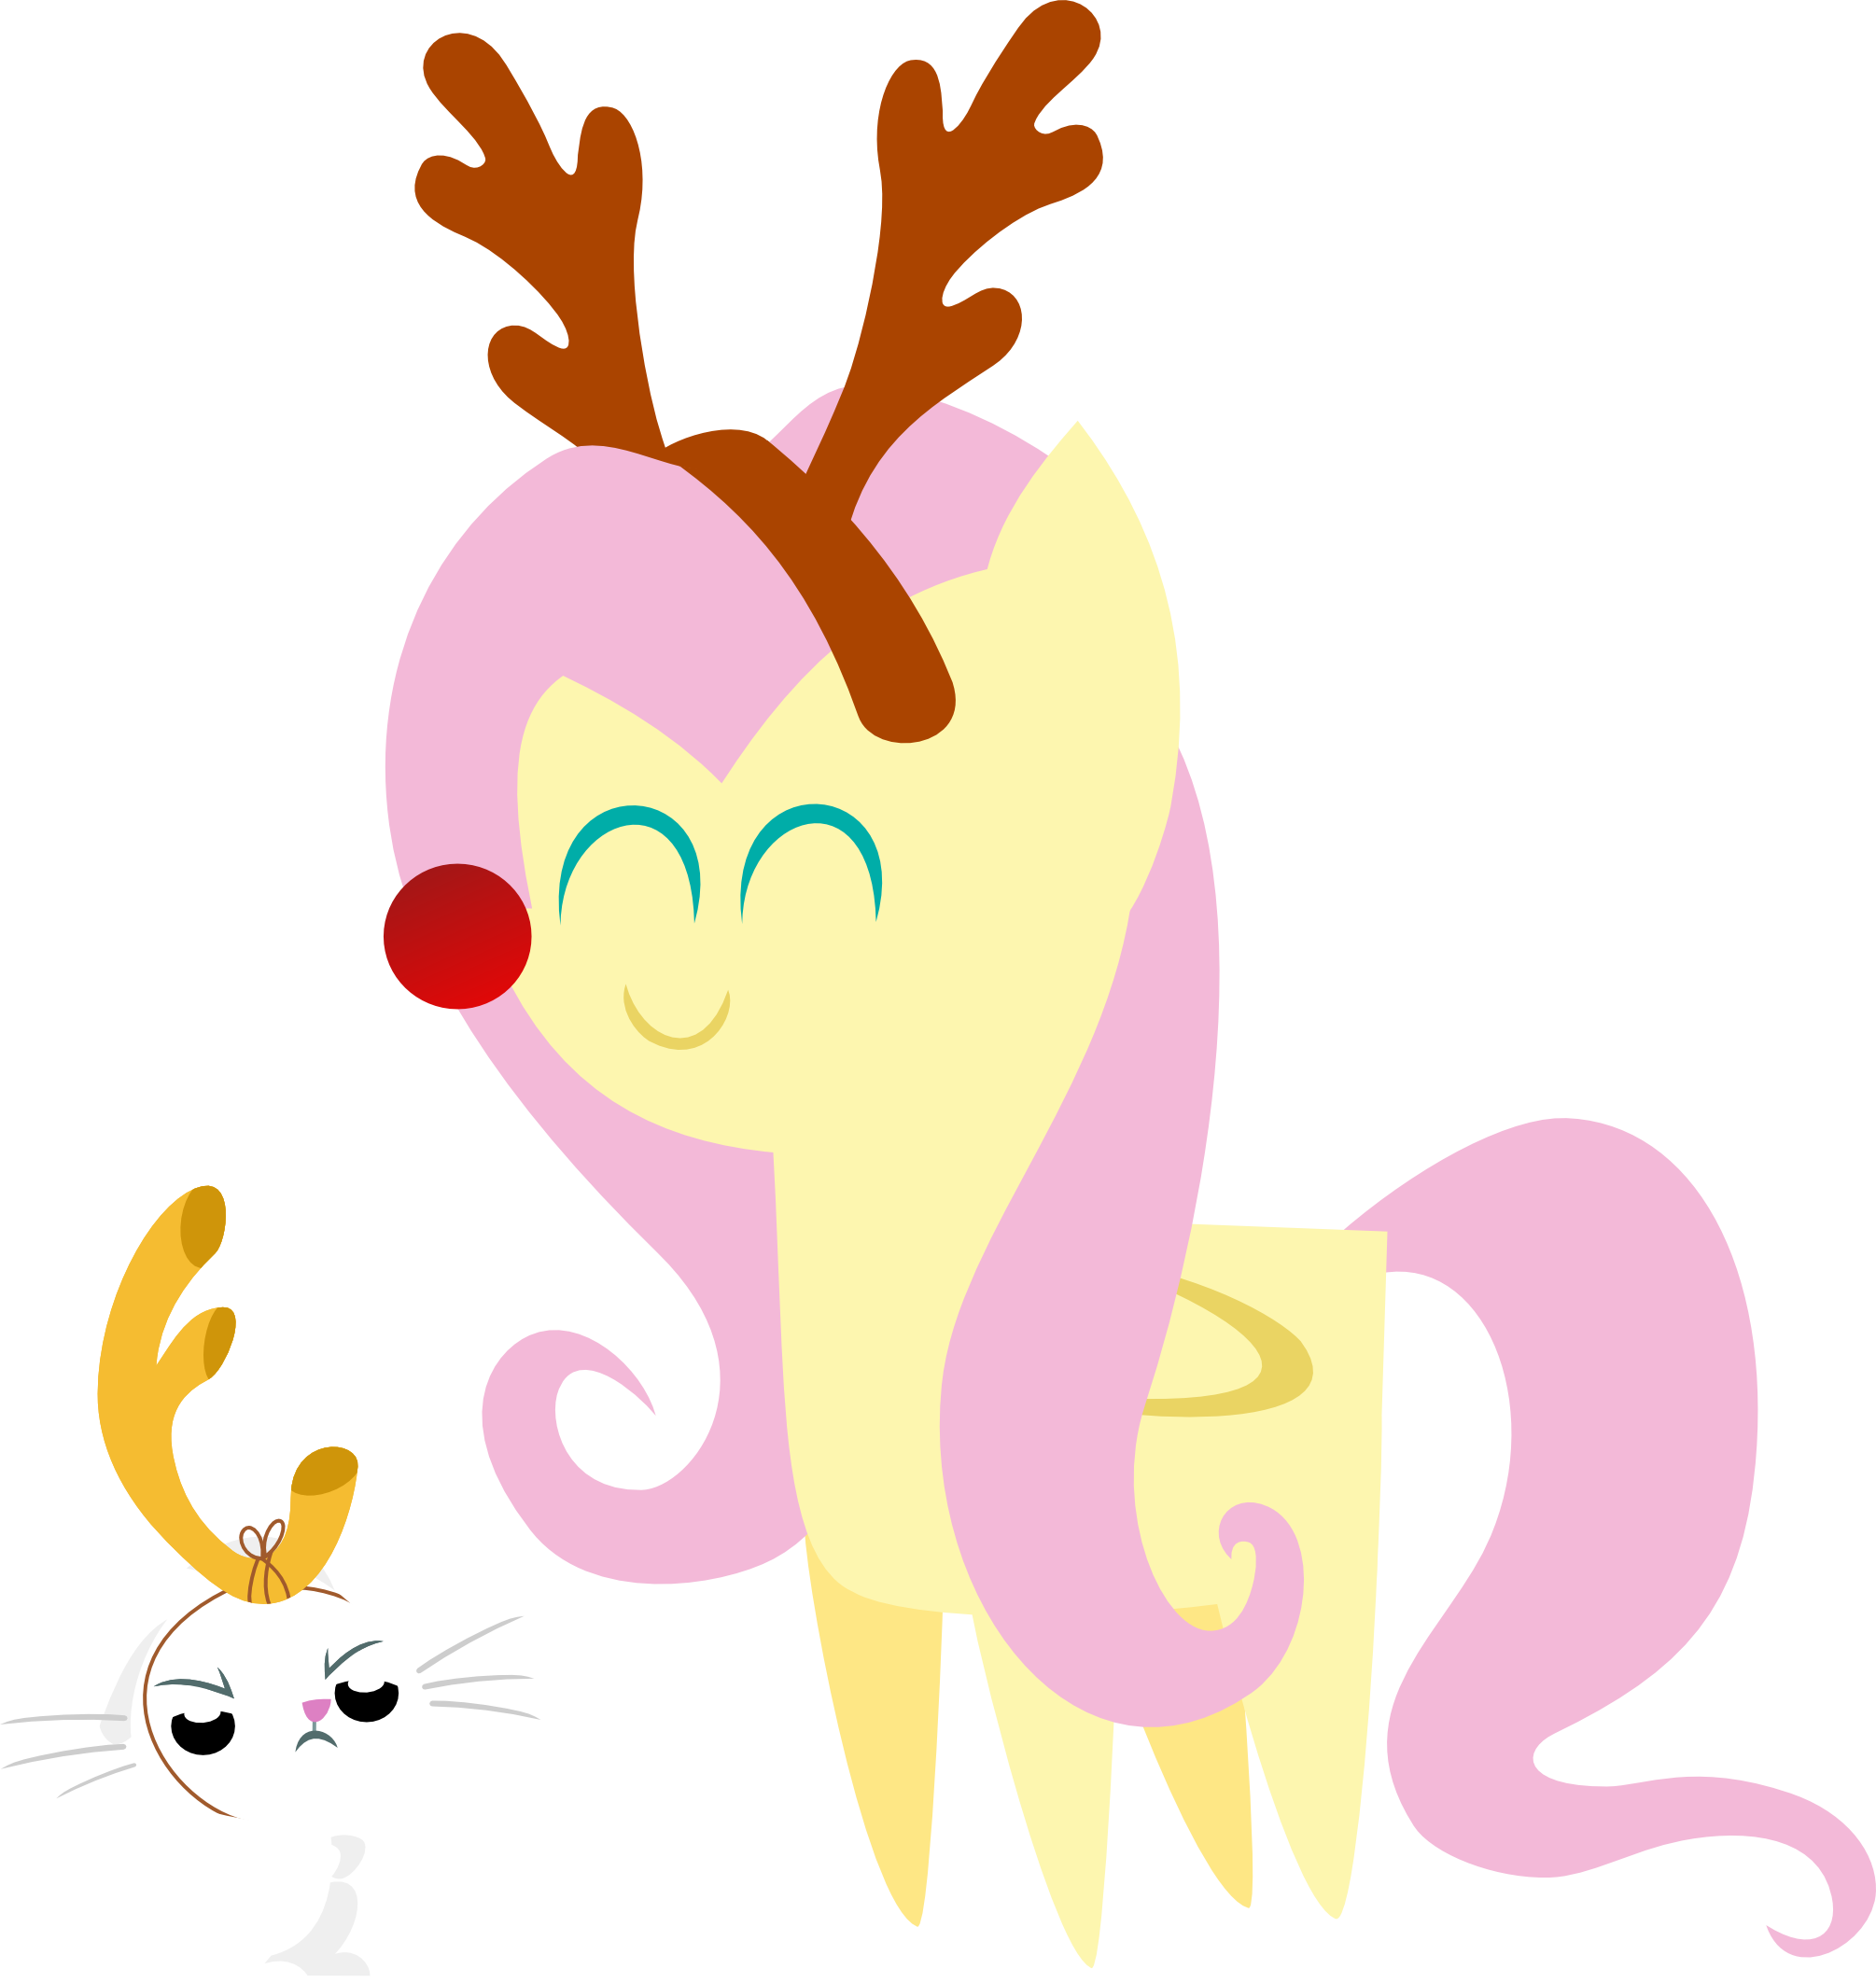 25 Days of Christmas Ponies- Day 14 Fluttershy